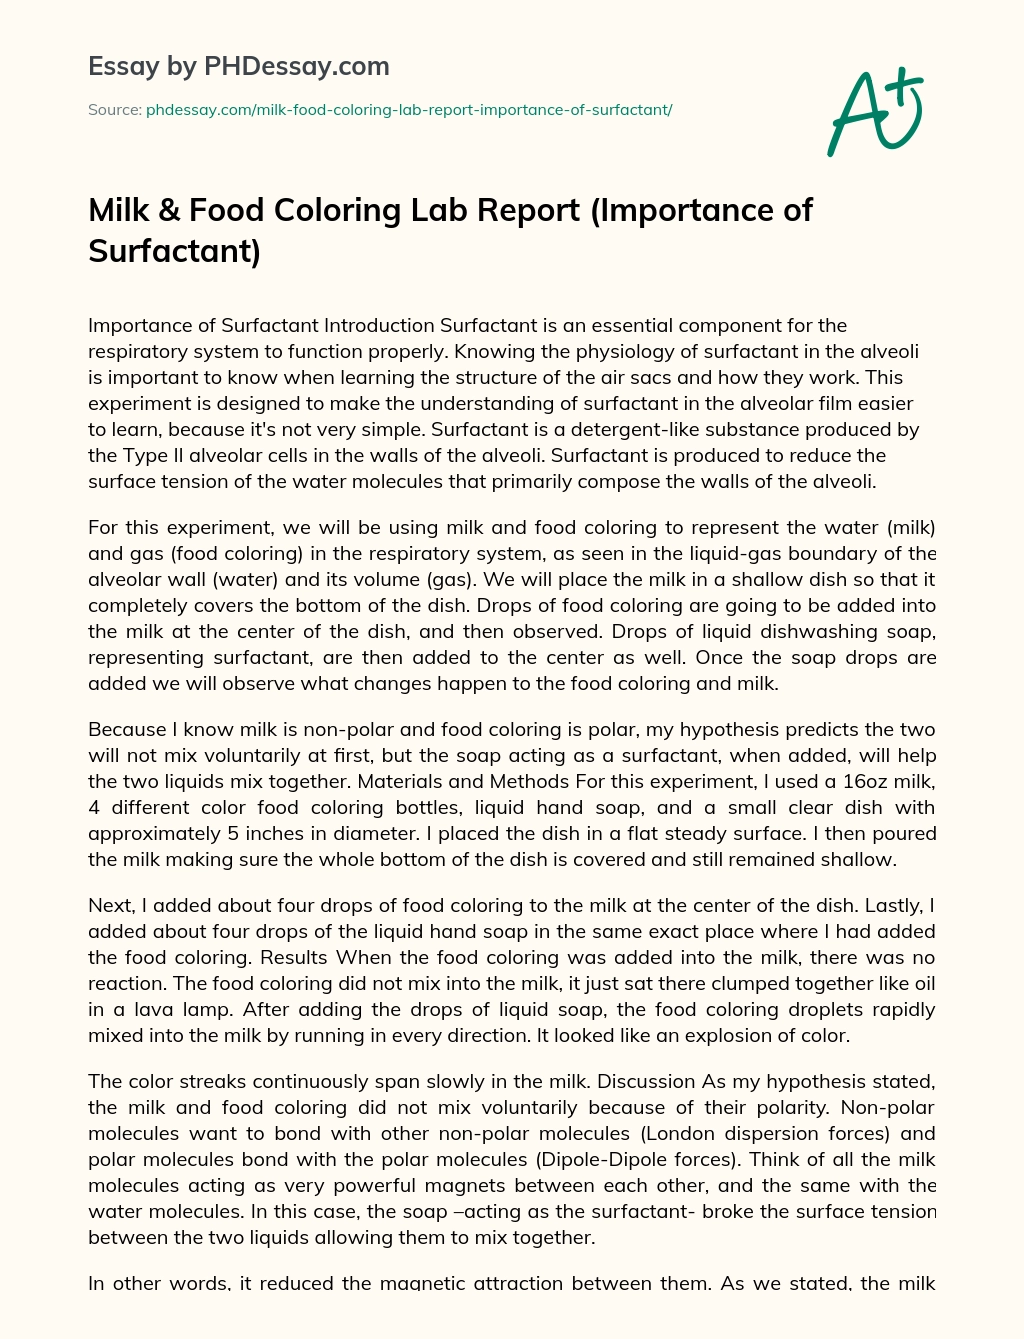 Milk & Food Coloring Lab Report (Importance of Surfactant) essay